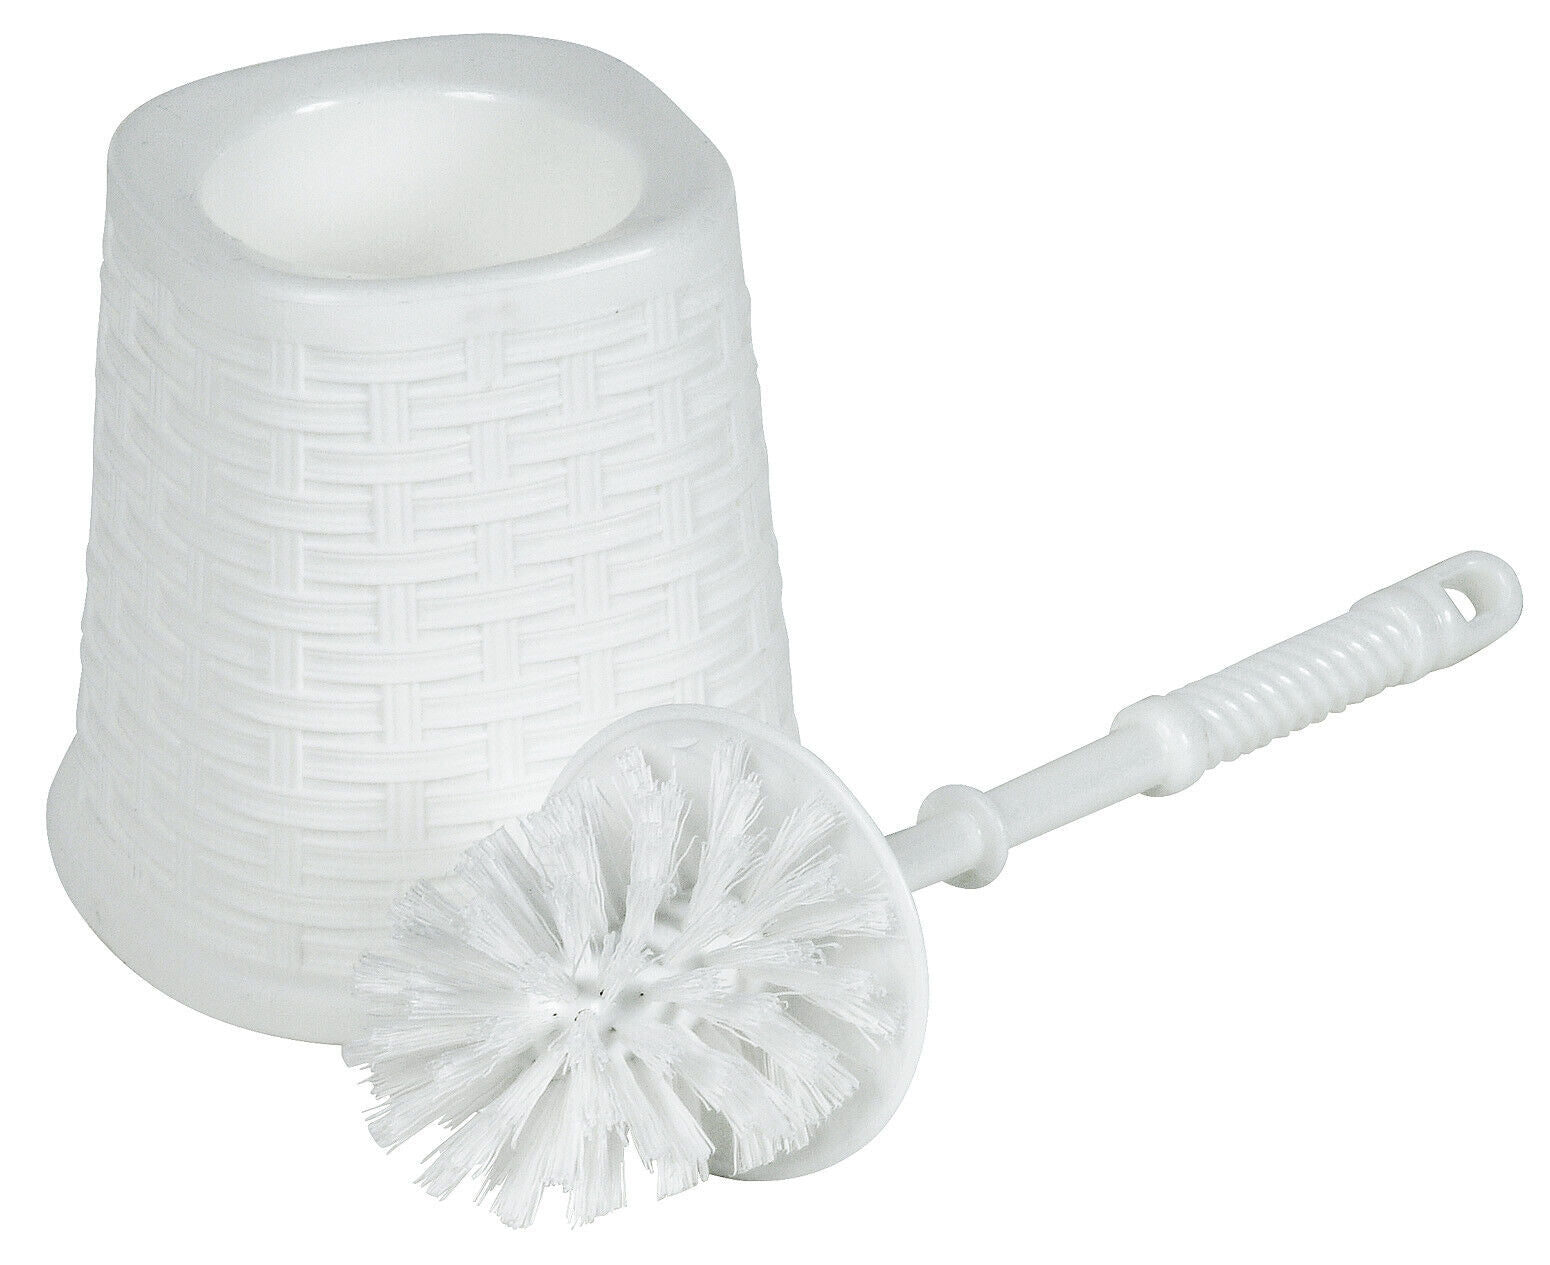 Superio Toilet Bowl Brush and Holder set, Wicker Style, Color Options:  White and Beige